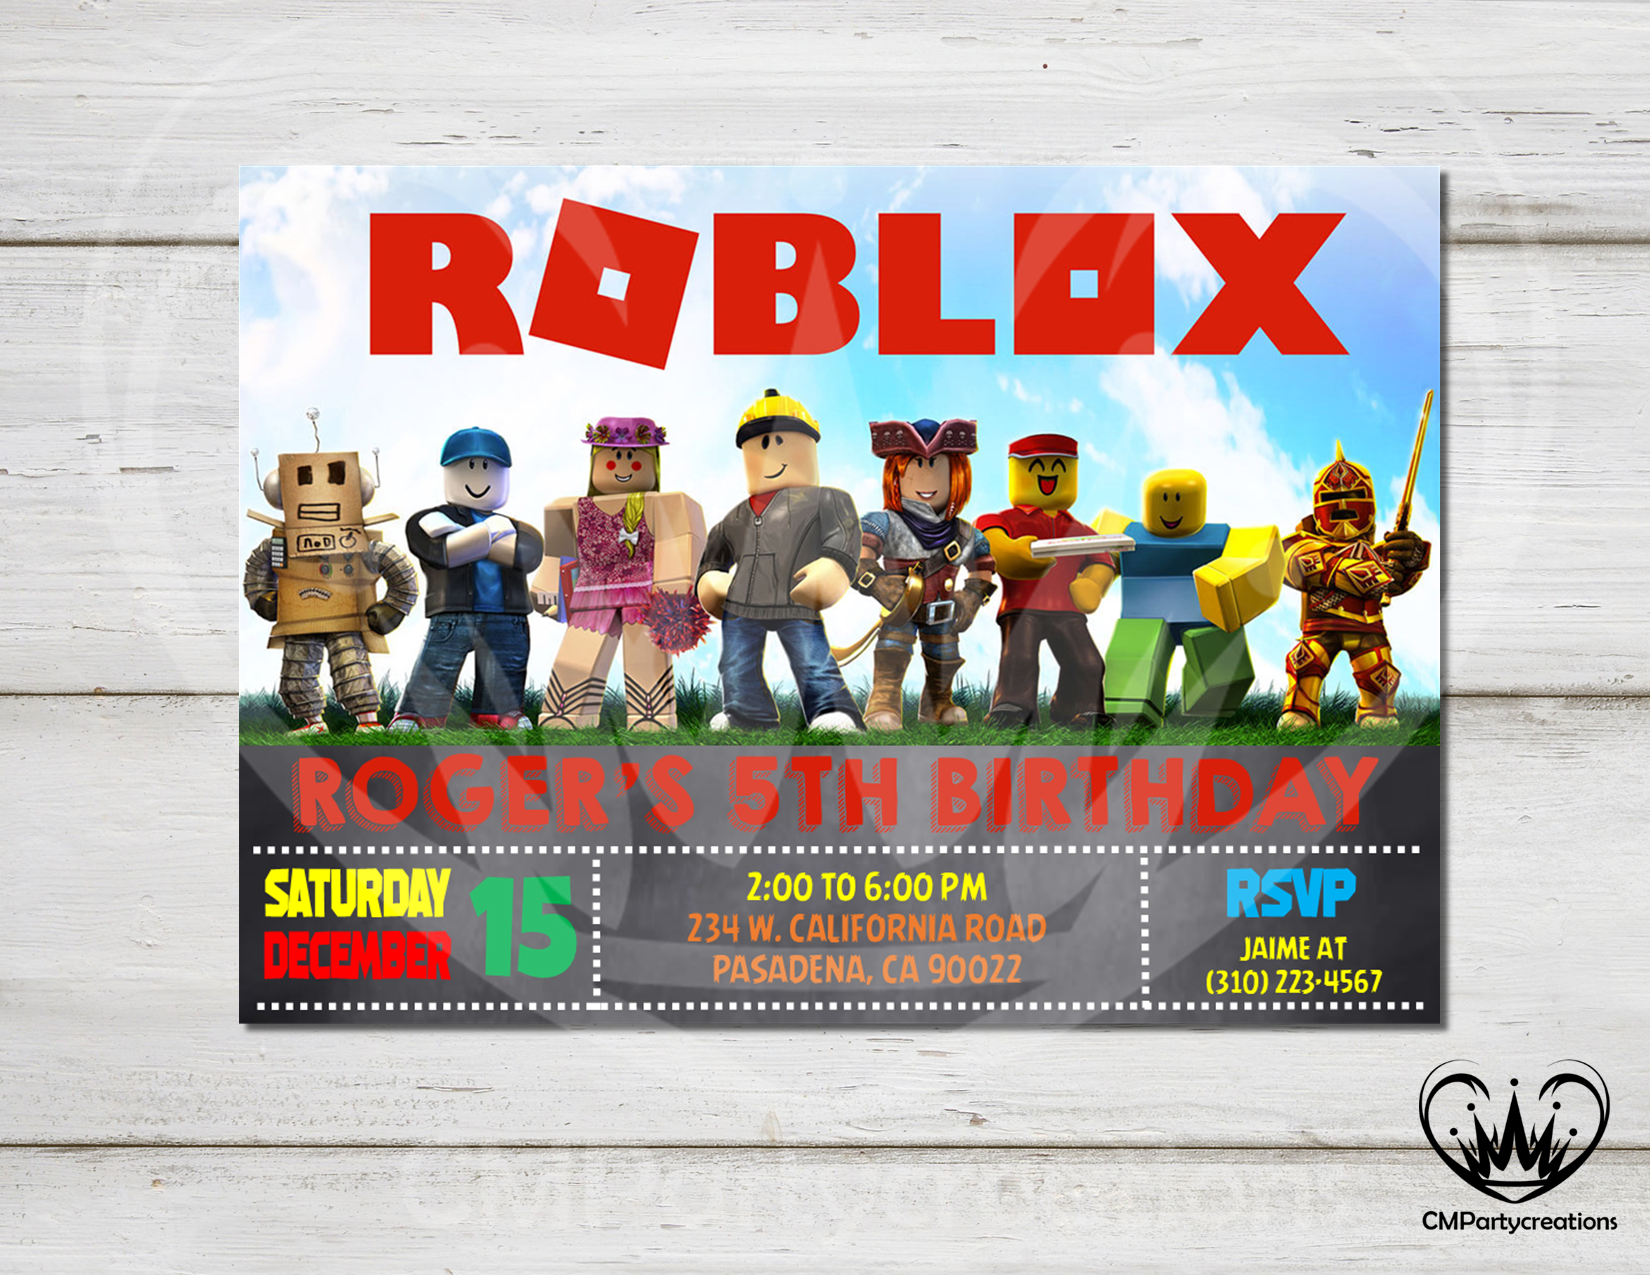 Roblox Group Invitation Birthday Party Cmpartycreations - how to invite someone to your party in roblox